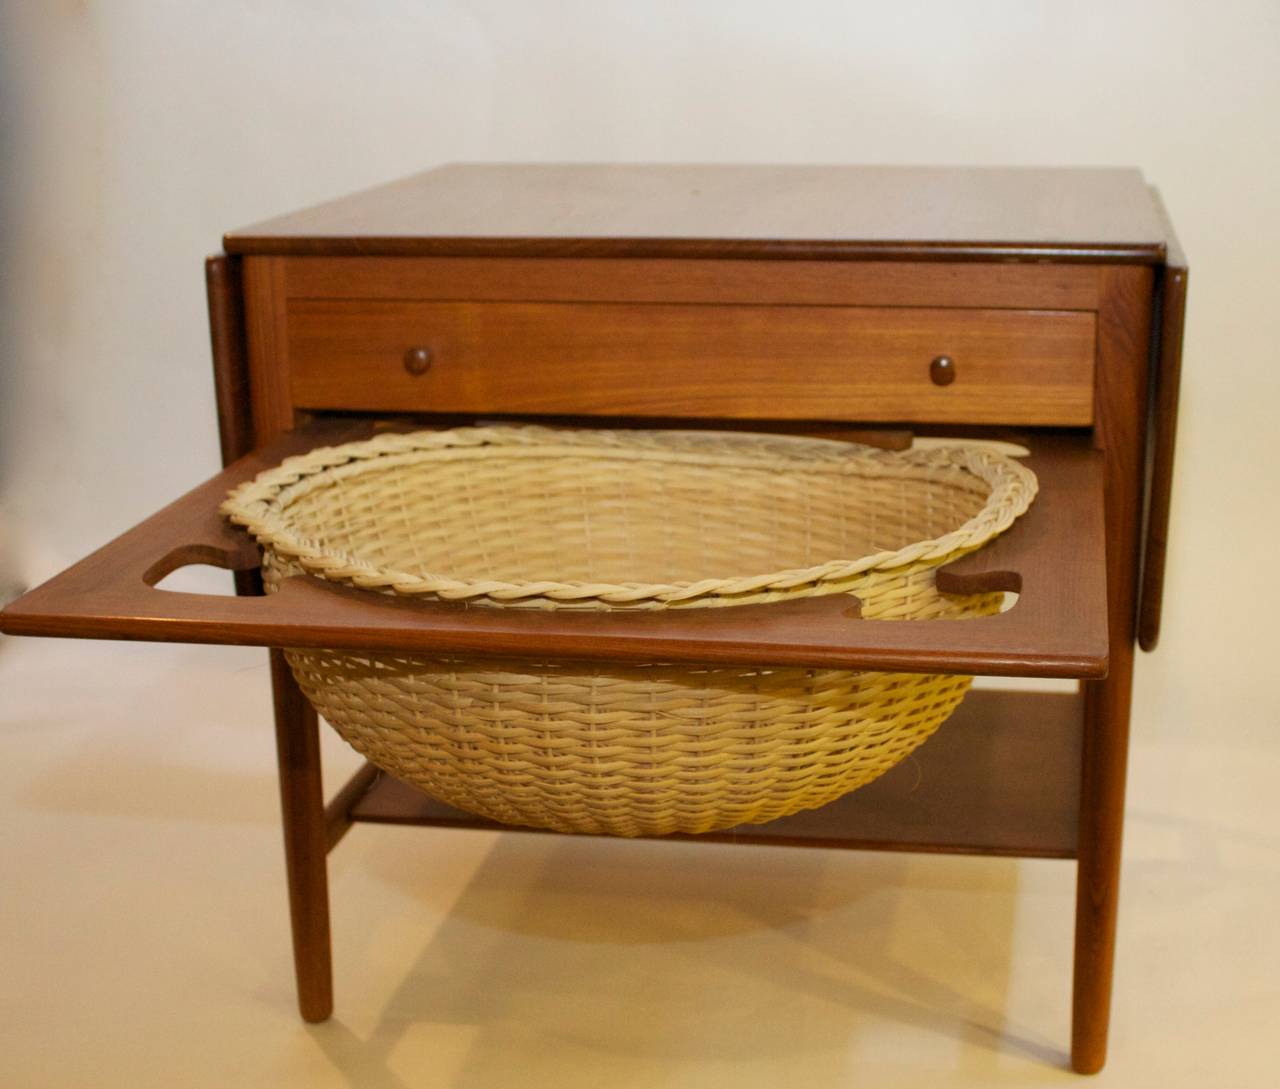 Beautiful drop leaf sewing basket/side table by Hans Wegner for Andreas Tuck.  This table features drop leaves on either side, a drawer with divided storage, a wicker basket/catchall and a lower shelf for additional storage.  A versatile and